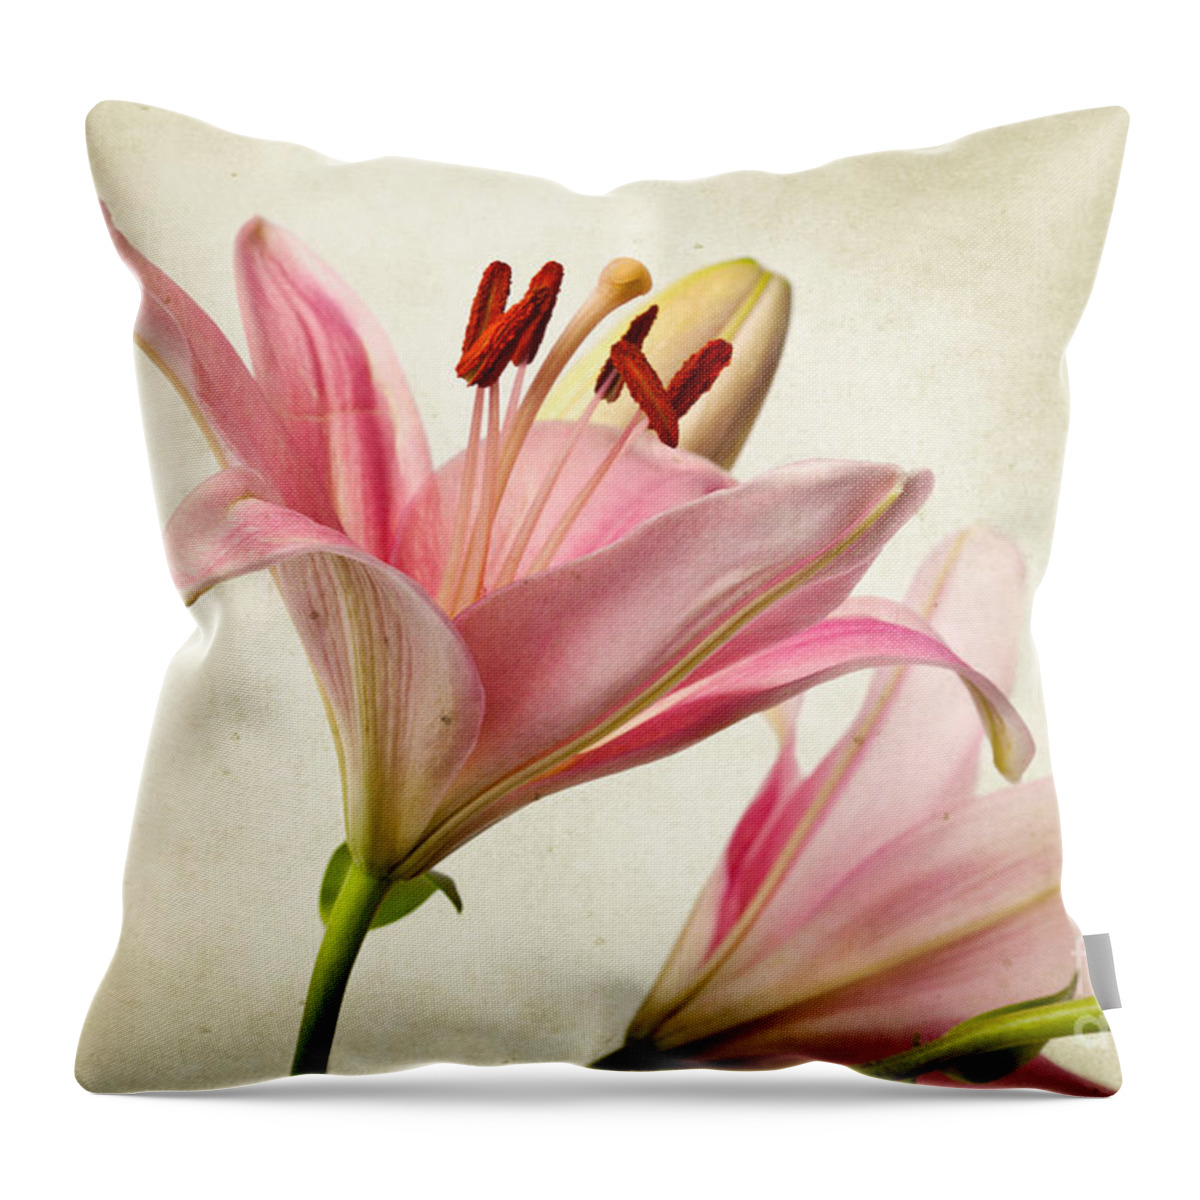 Lily Throw Pillow featuring the photograph Pink Lilies by Nailia Schwarz